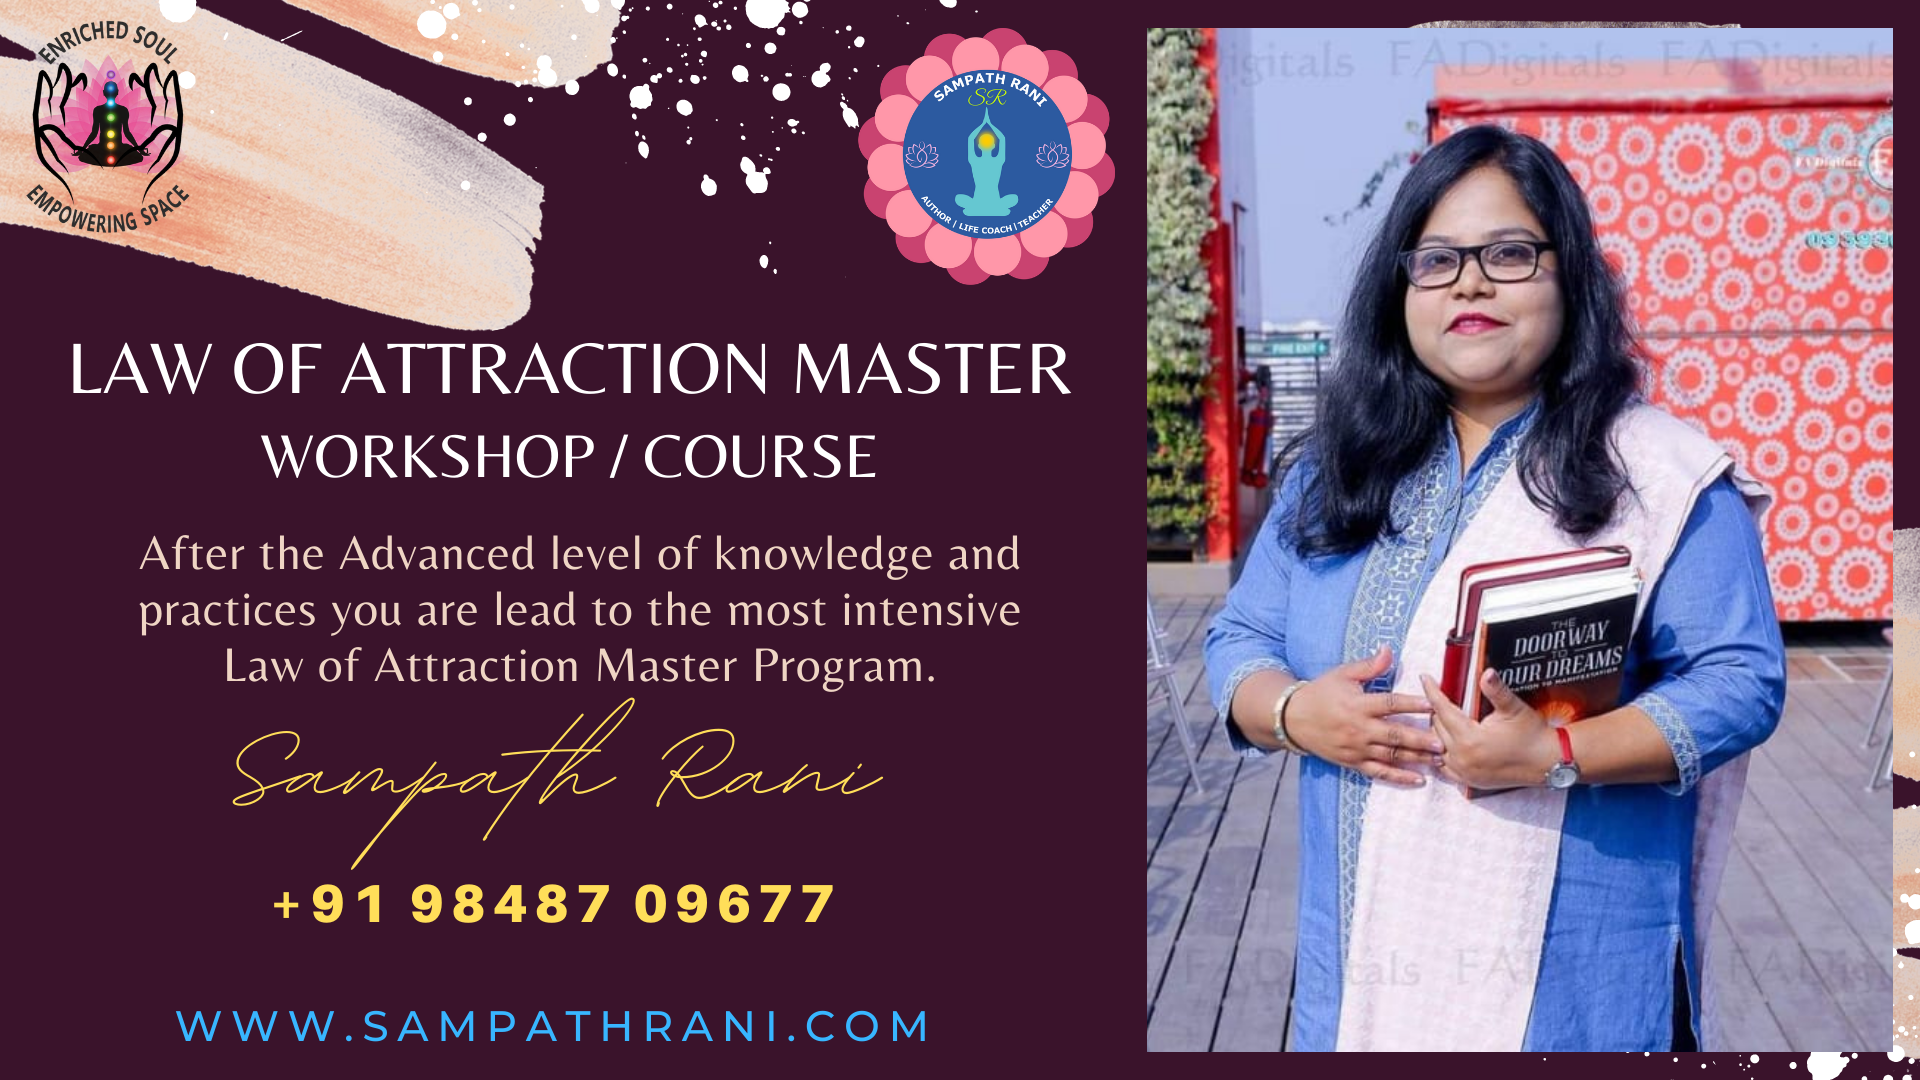 Law of Attraction Master Workshop, Course - by Sampath Rani - Bhubaneswar